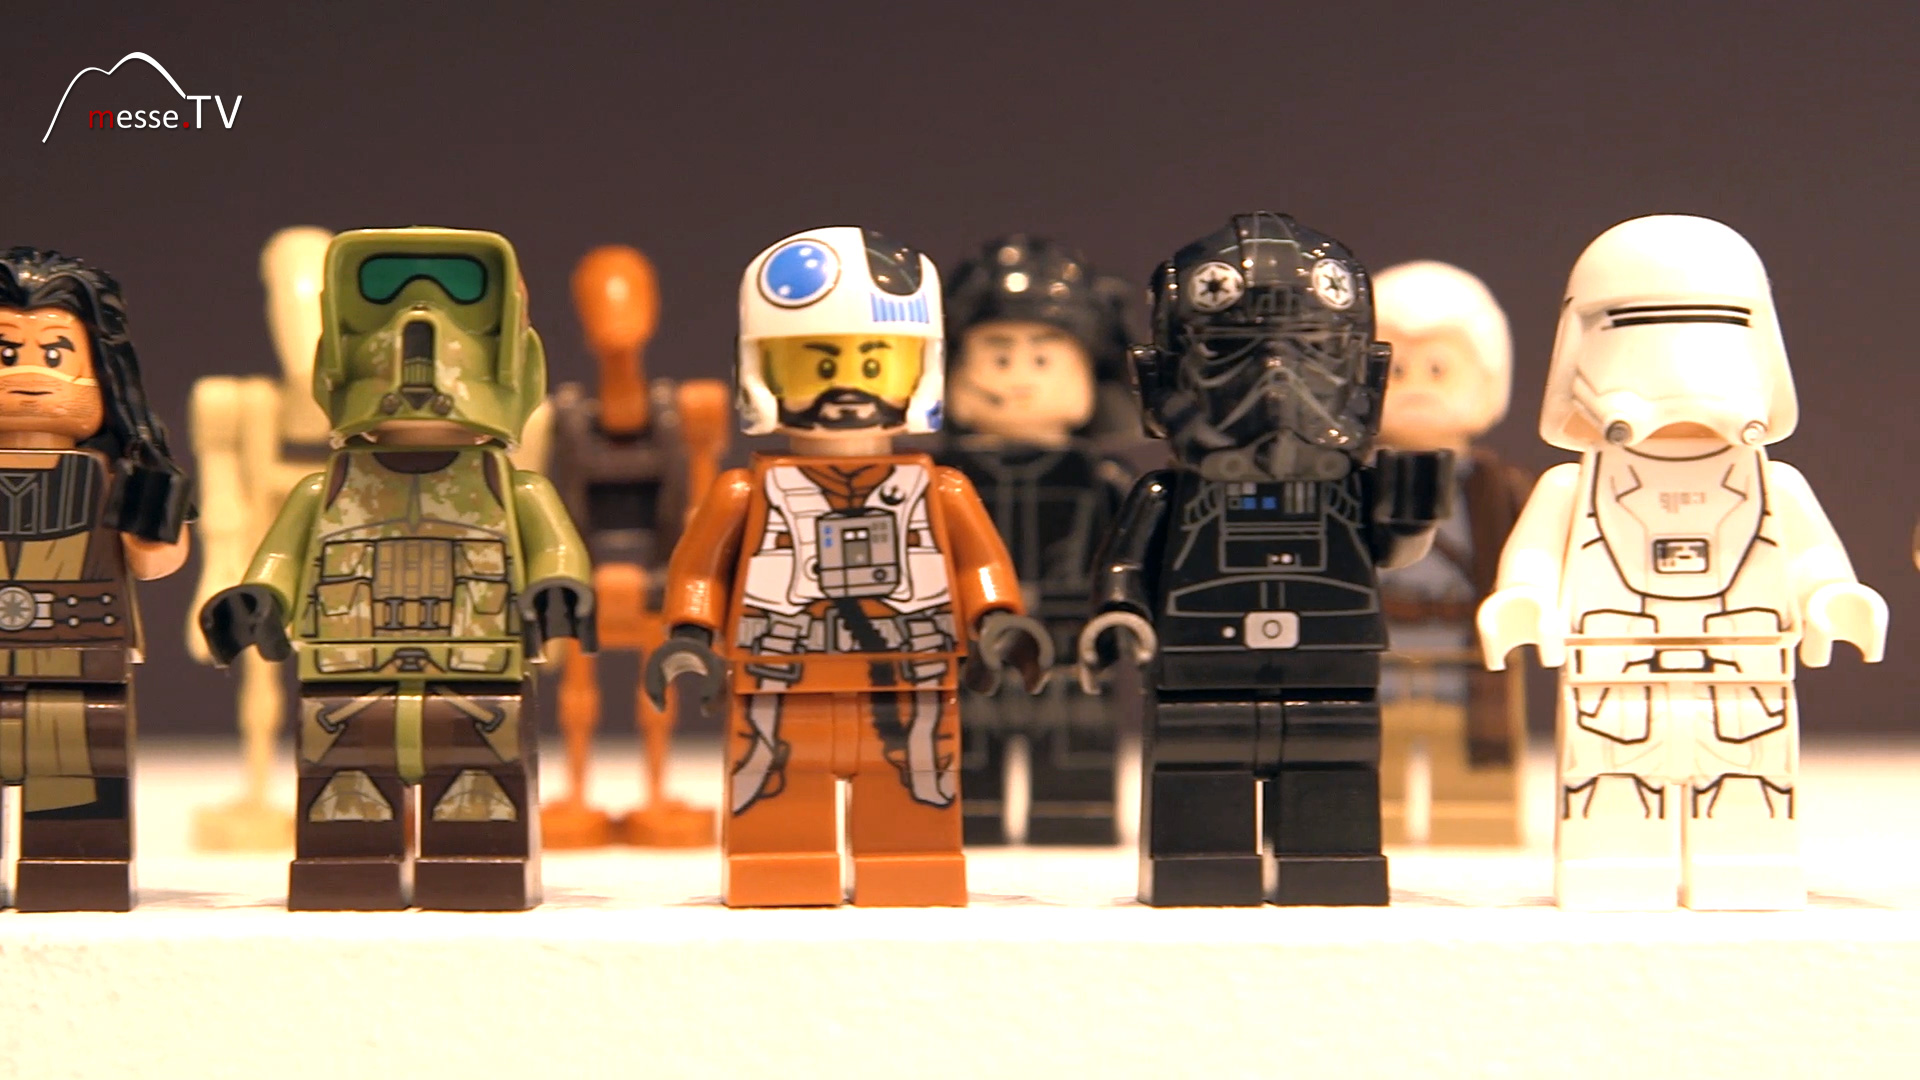 Star Wars play figures from LEGO